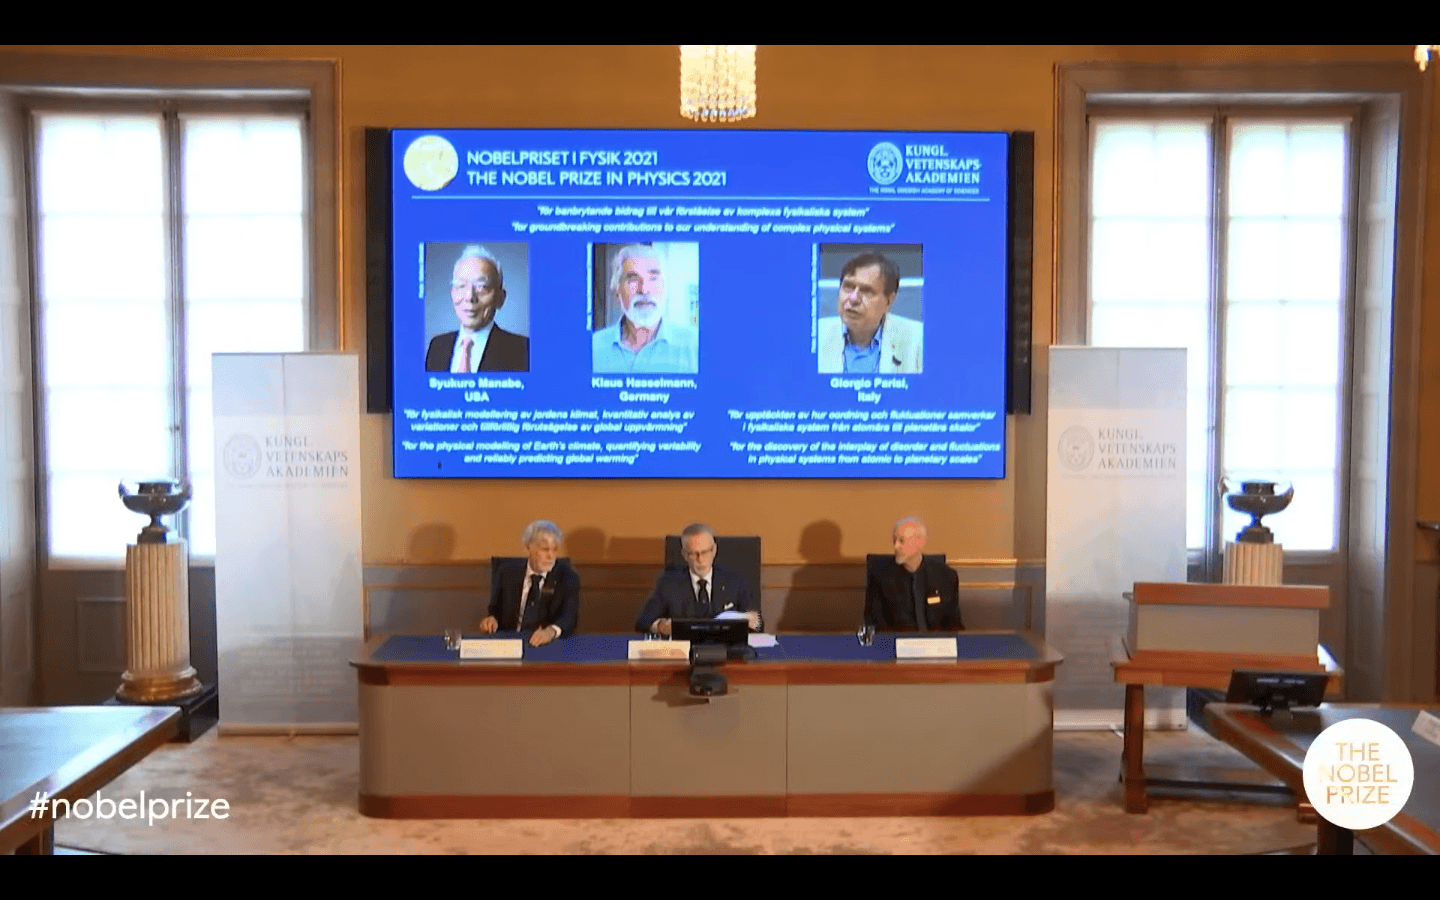 Trio win Physics Nobel Prize for work on understanding climate change